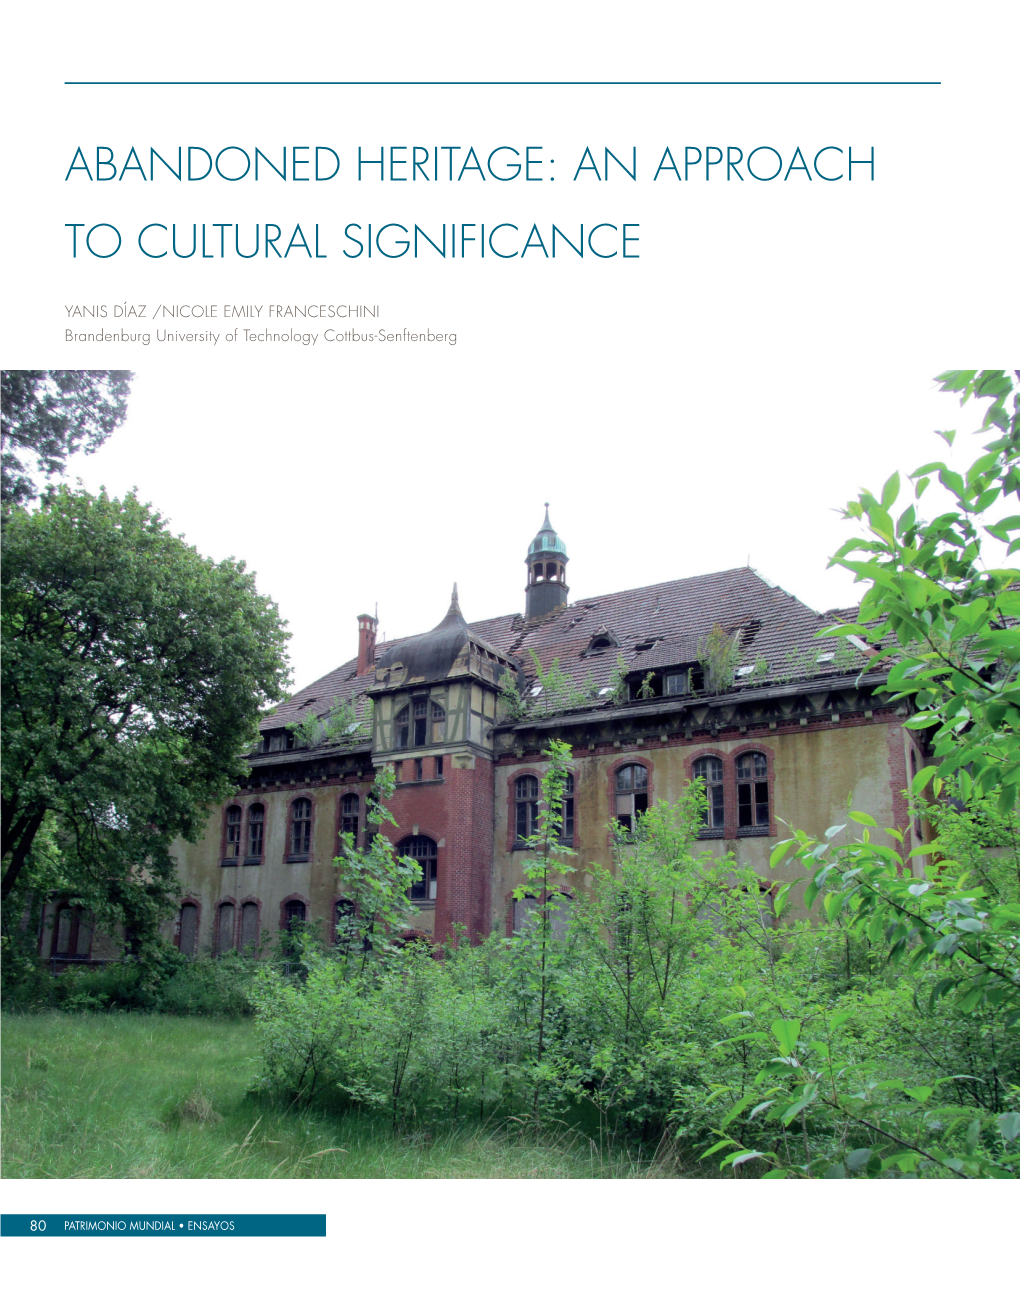 Abandoned Heritage: an Approach to Cultural Significance